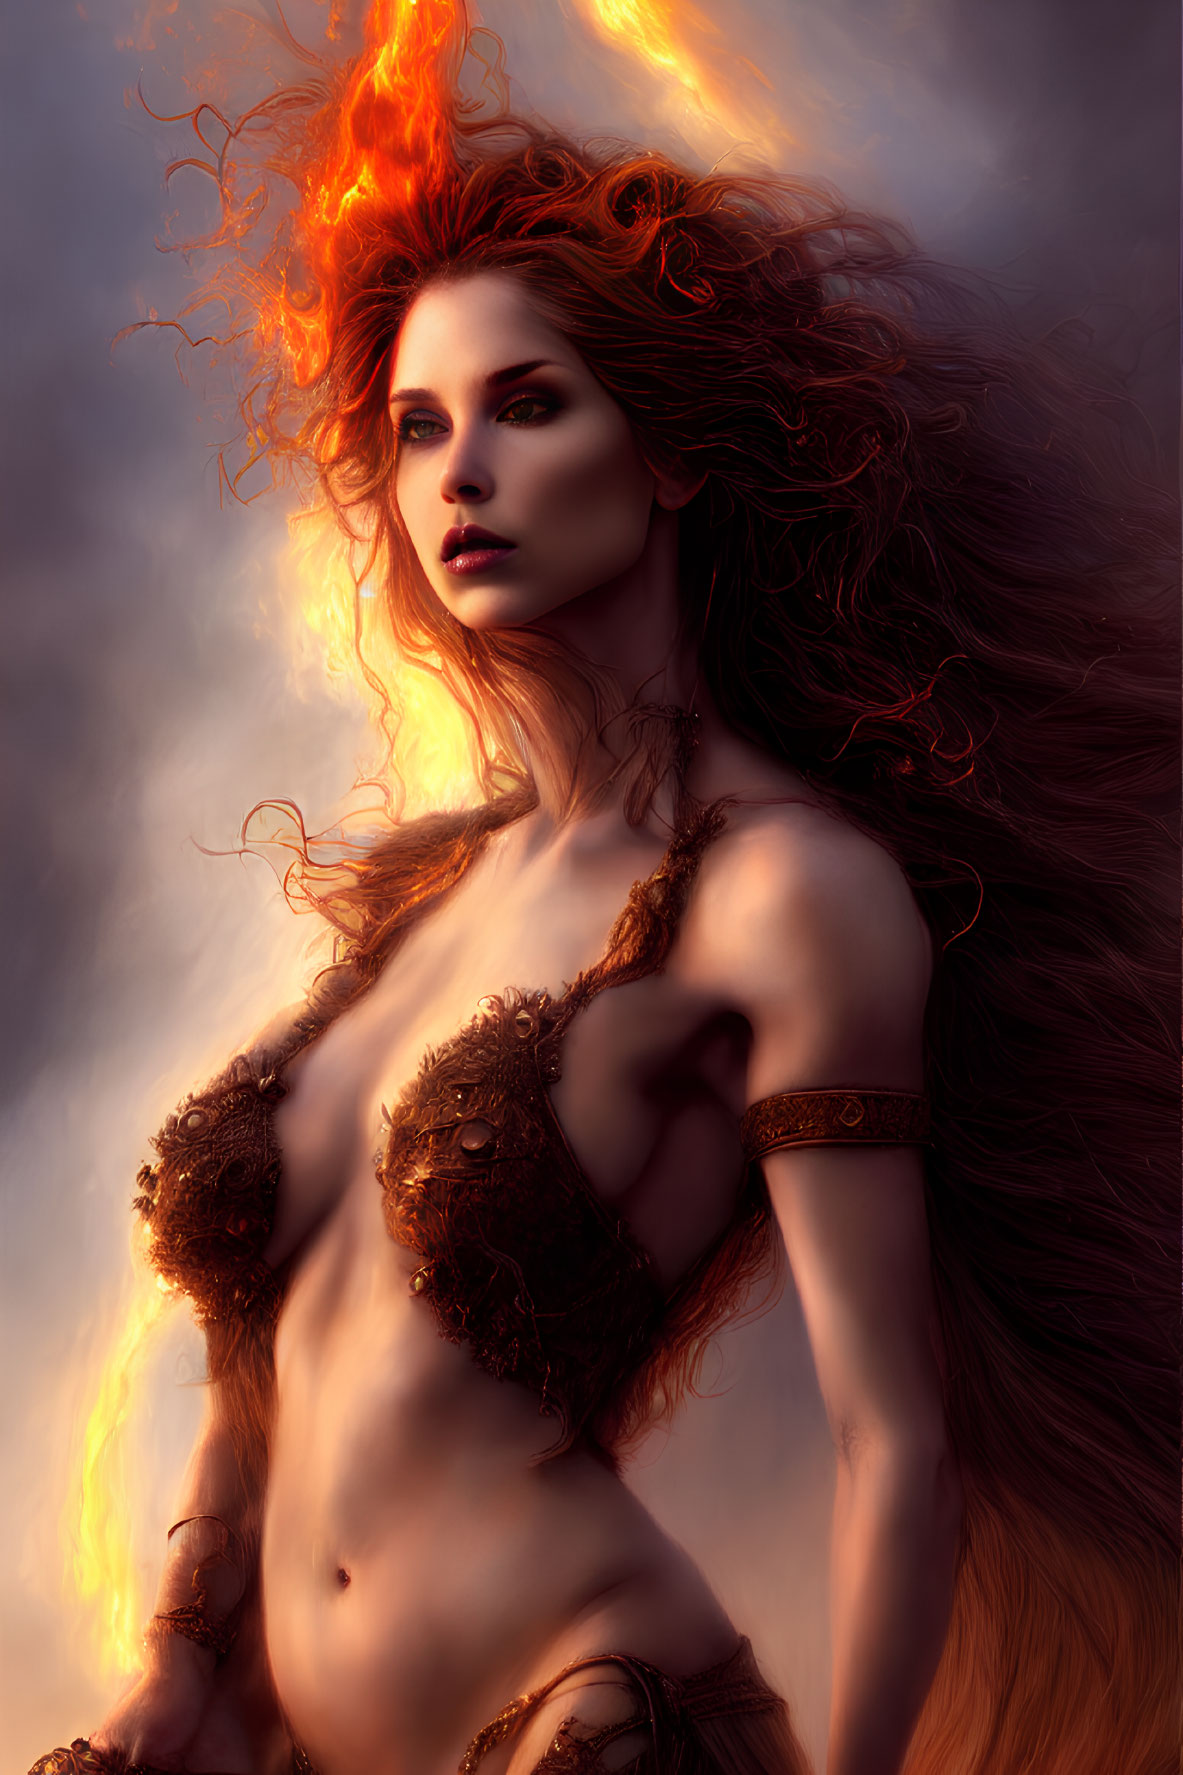 Fantasy artwork of woman with fiery red hair in bronze armor against cloudy sky